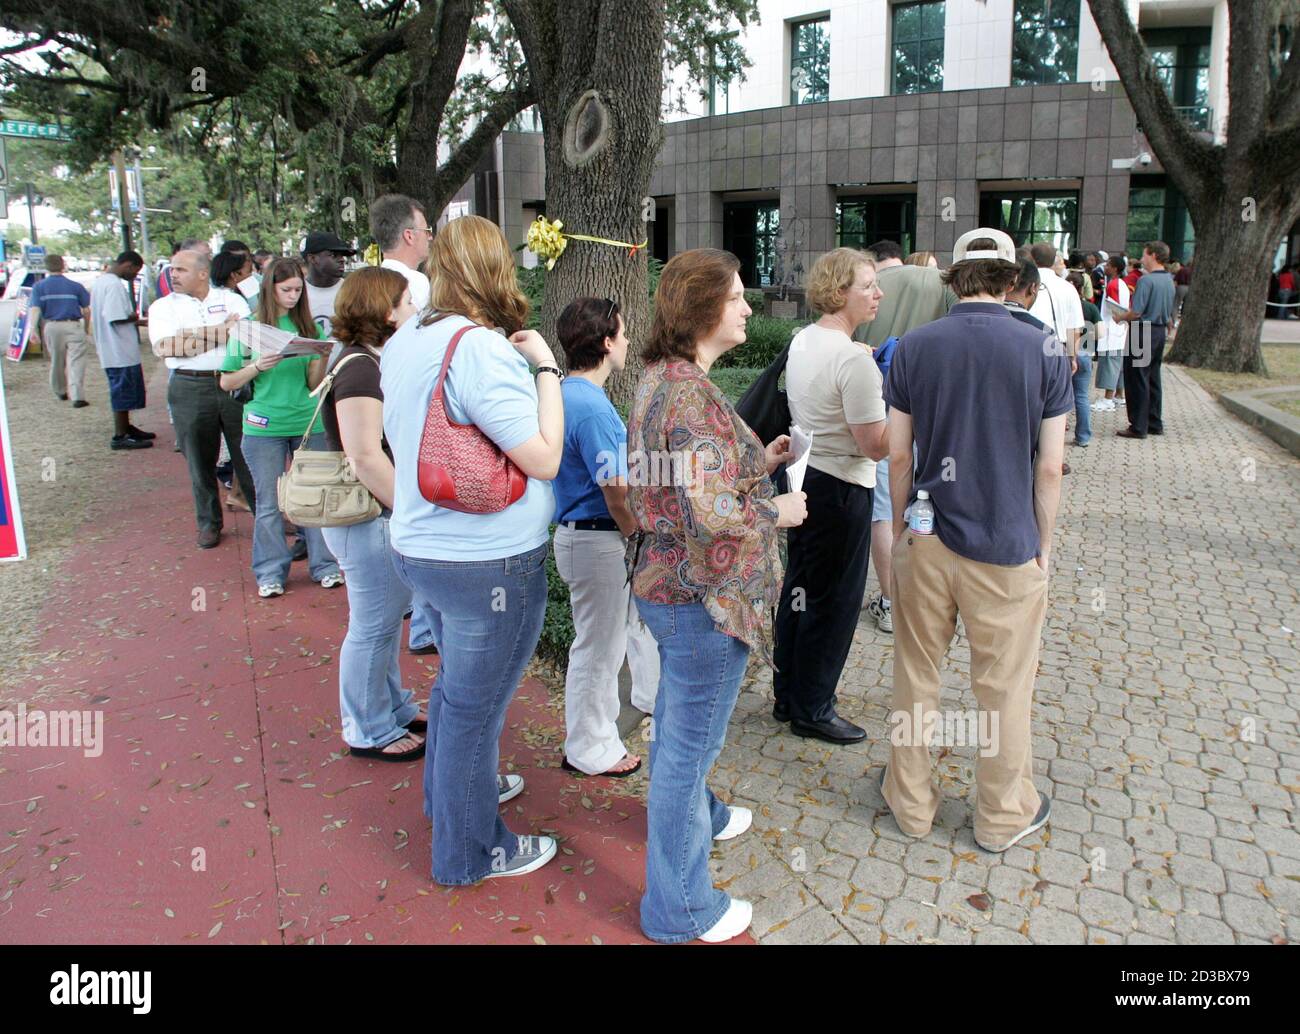 The early voting line wraps around three sides of the Leon County Courthouse in Tallahassee, Florida November 1, 2004. Voters secured their votes in the state of Florida by voting early. REUTERS/Mark Wallheiser  MW Stock Photo